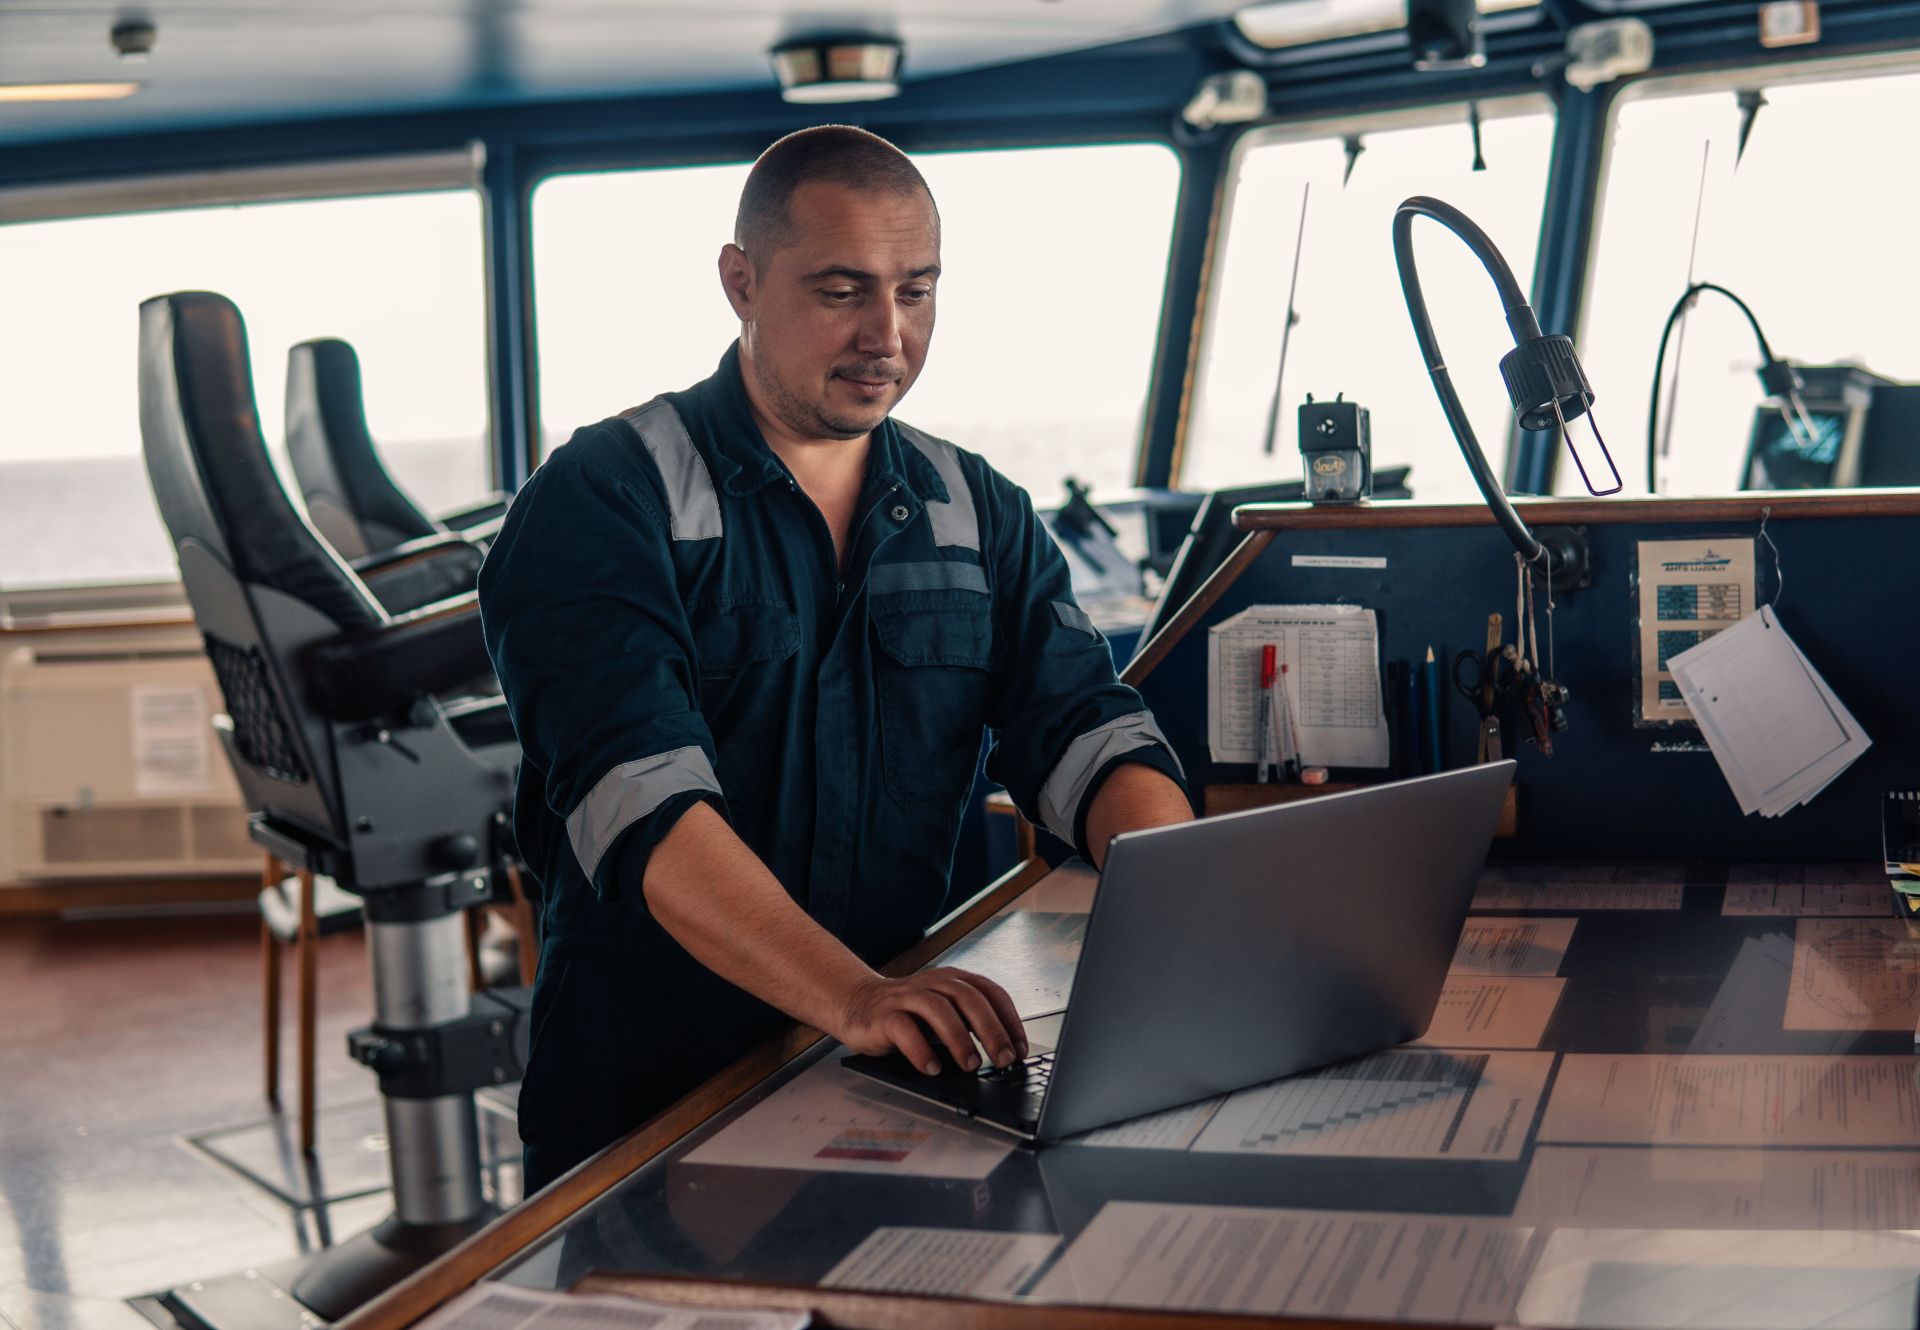 Maritime officer working on a laptop in the ship's bridge, organizing logistics with a focus on digital solutions.